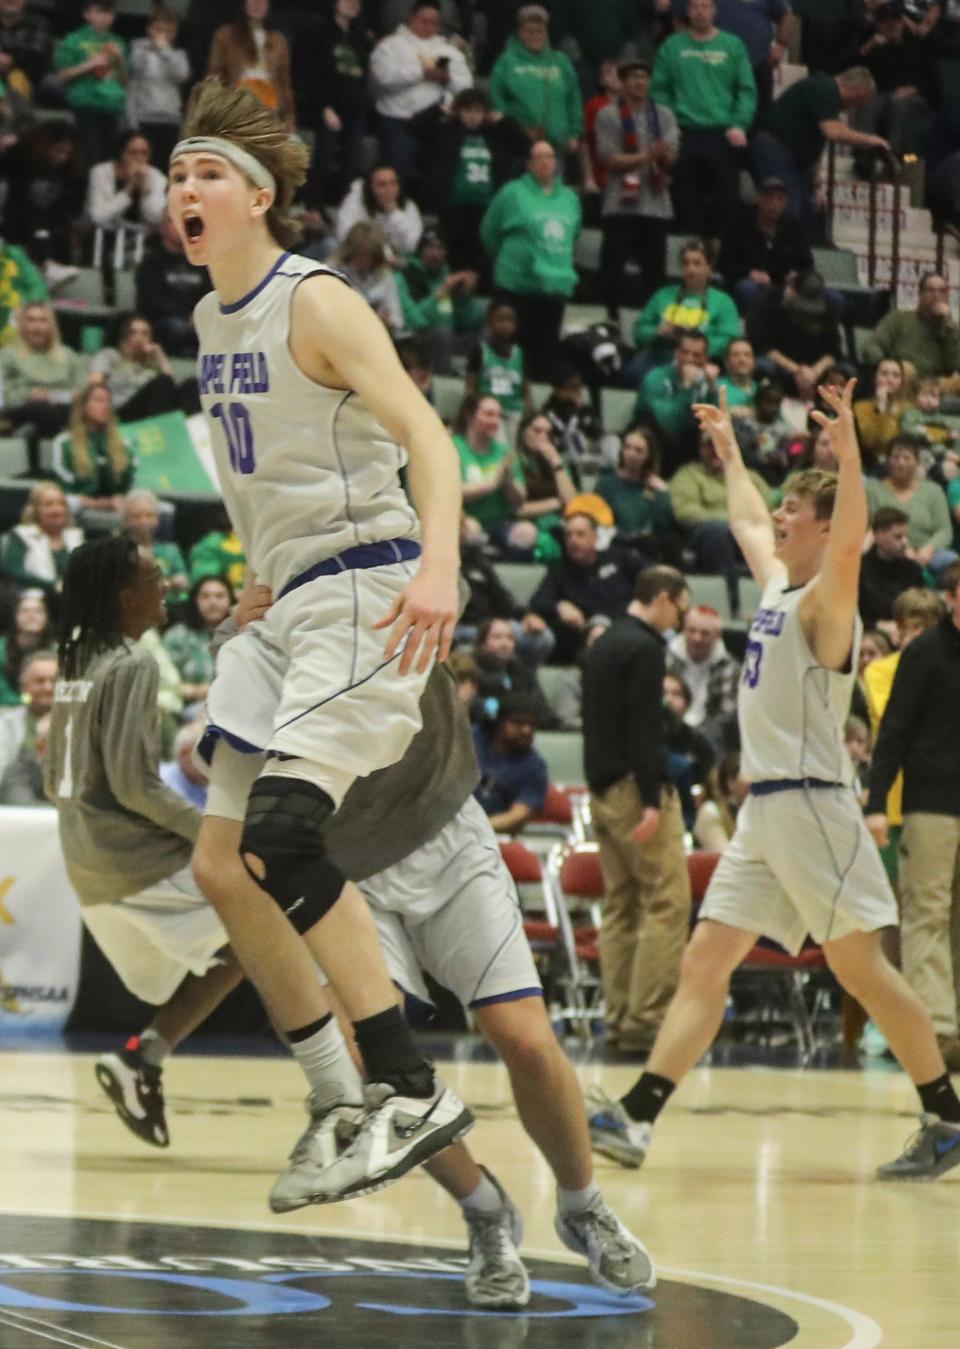 Leam Powell and Chapel Field celebrate after defeating North Warren 47-46 to win a NYSPHSAA Class D semifinal basketball game at the Cool Insuring Arena in Glens Falls March 18, 2023. Powell hit the winning shot with twelve seconds left in the game. 